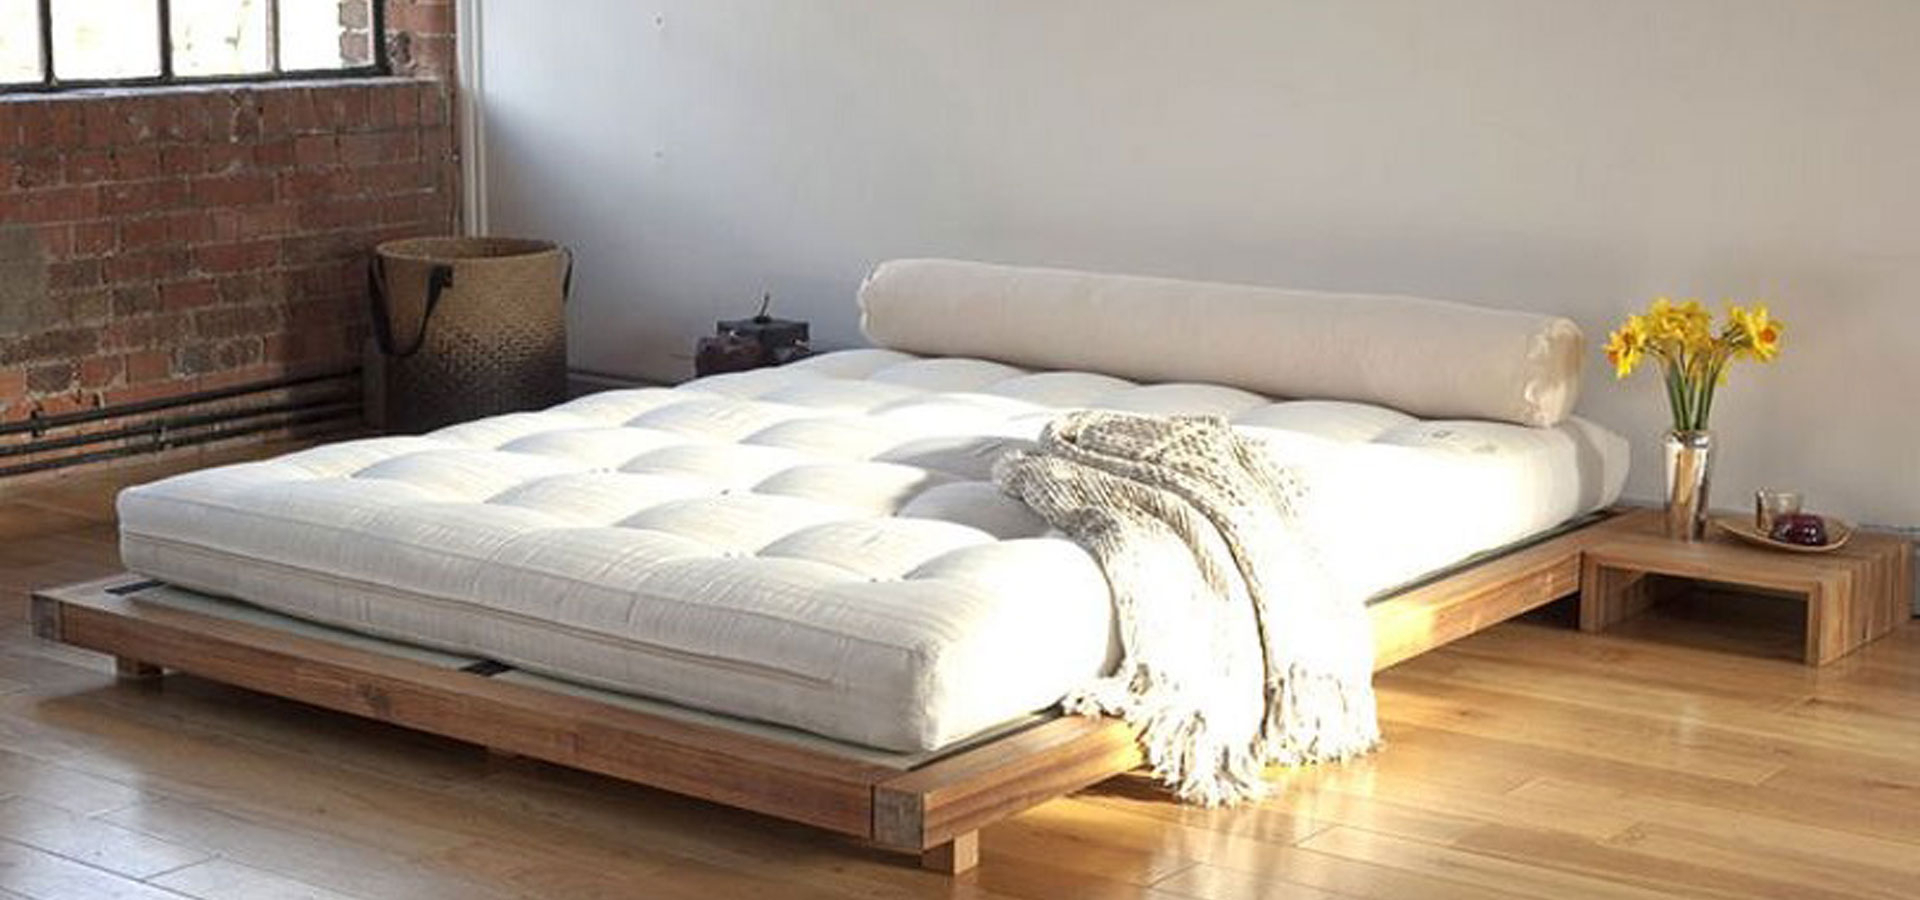 bed sheets for low profile mattress